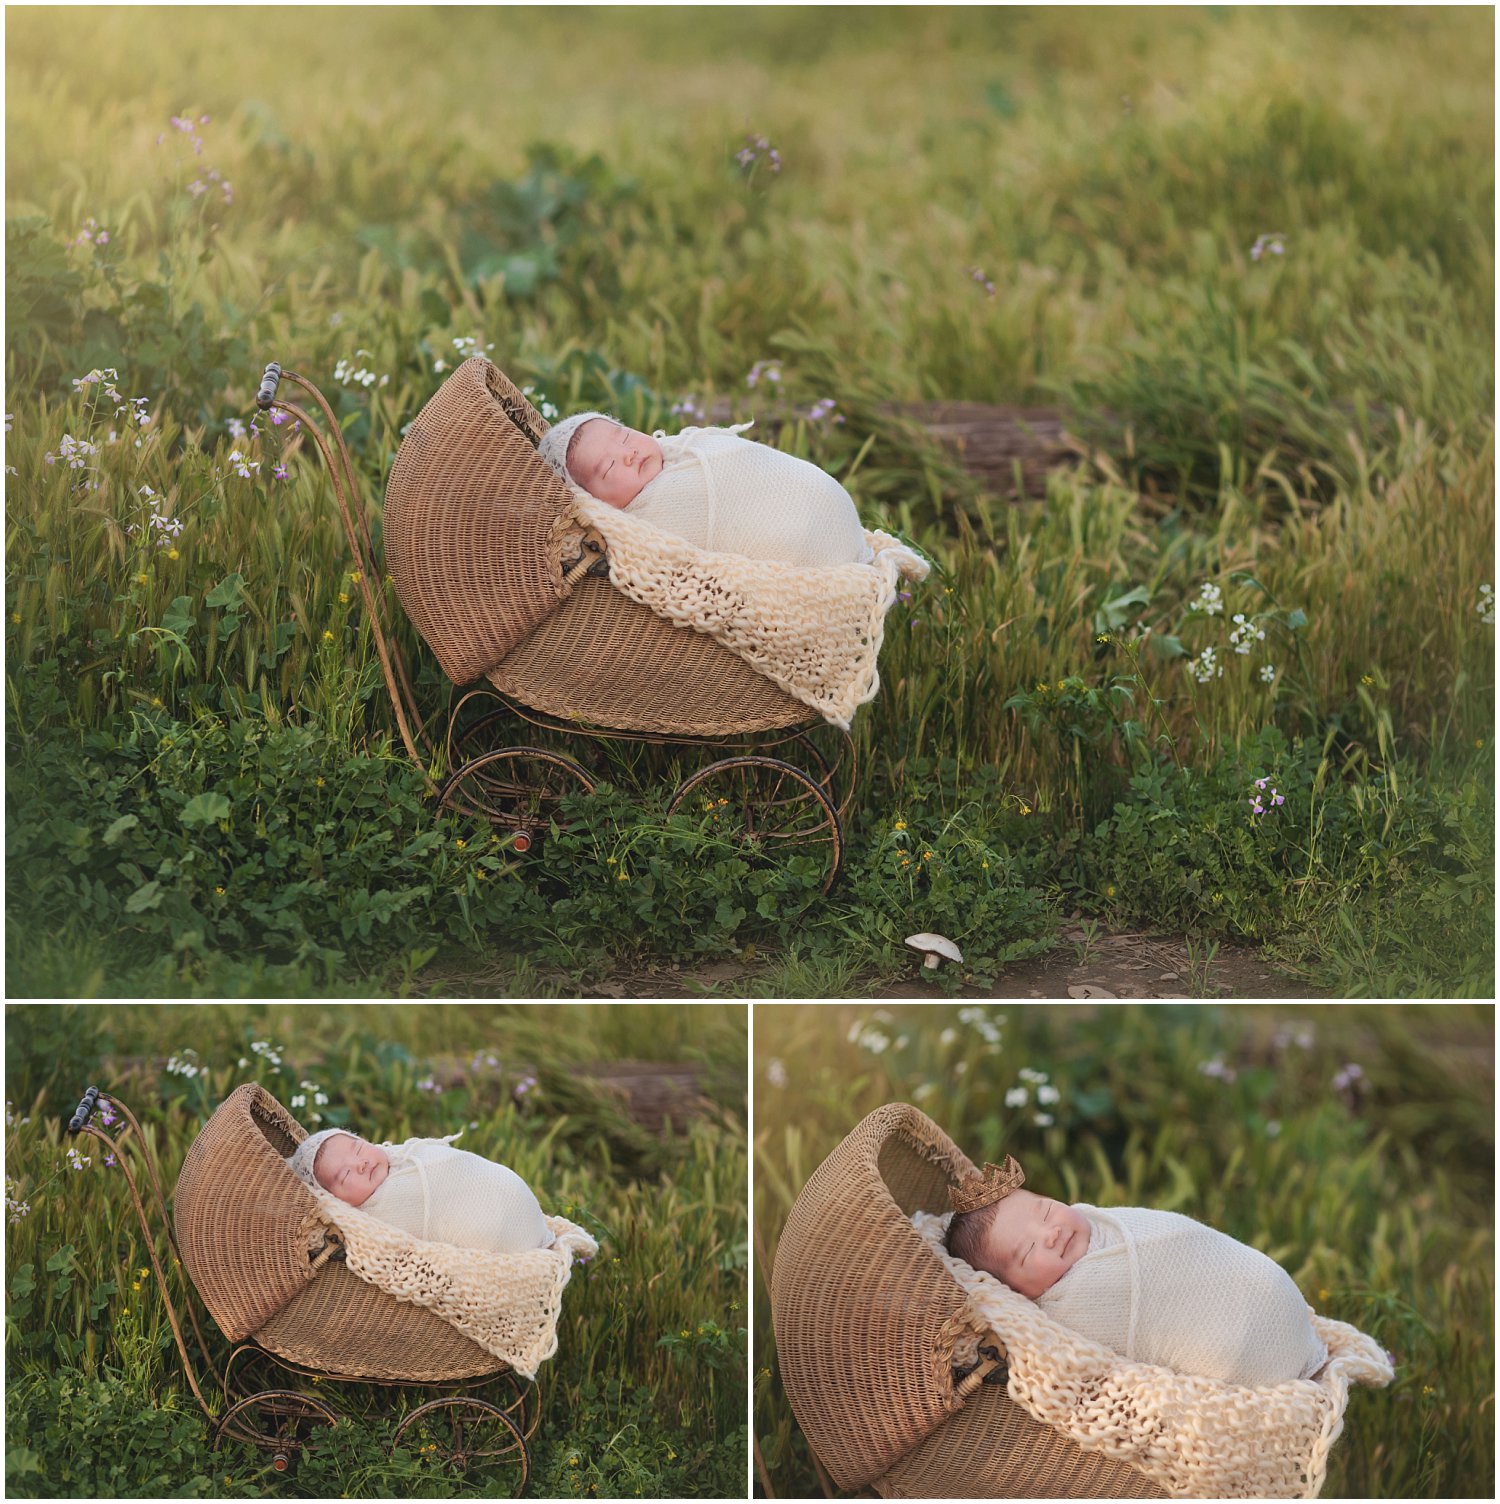 6 week baby boy sleeping outdoors by A pocket of Time Photography